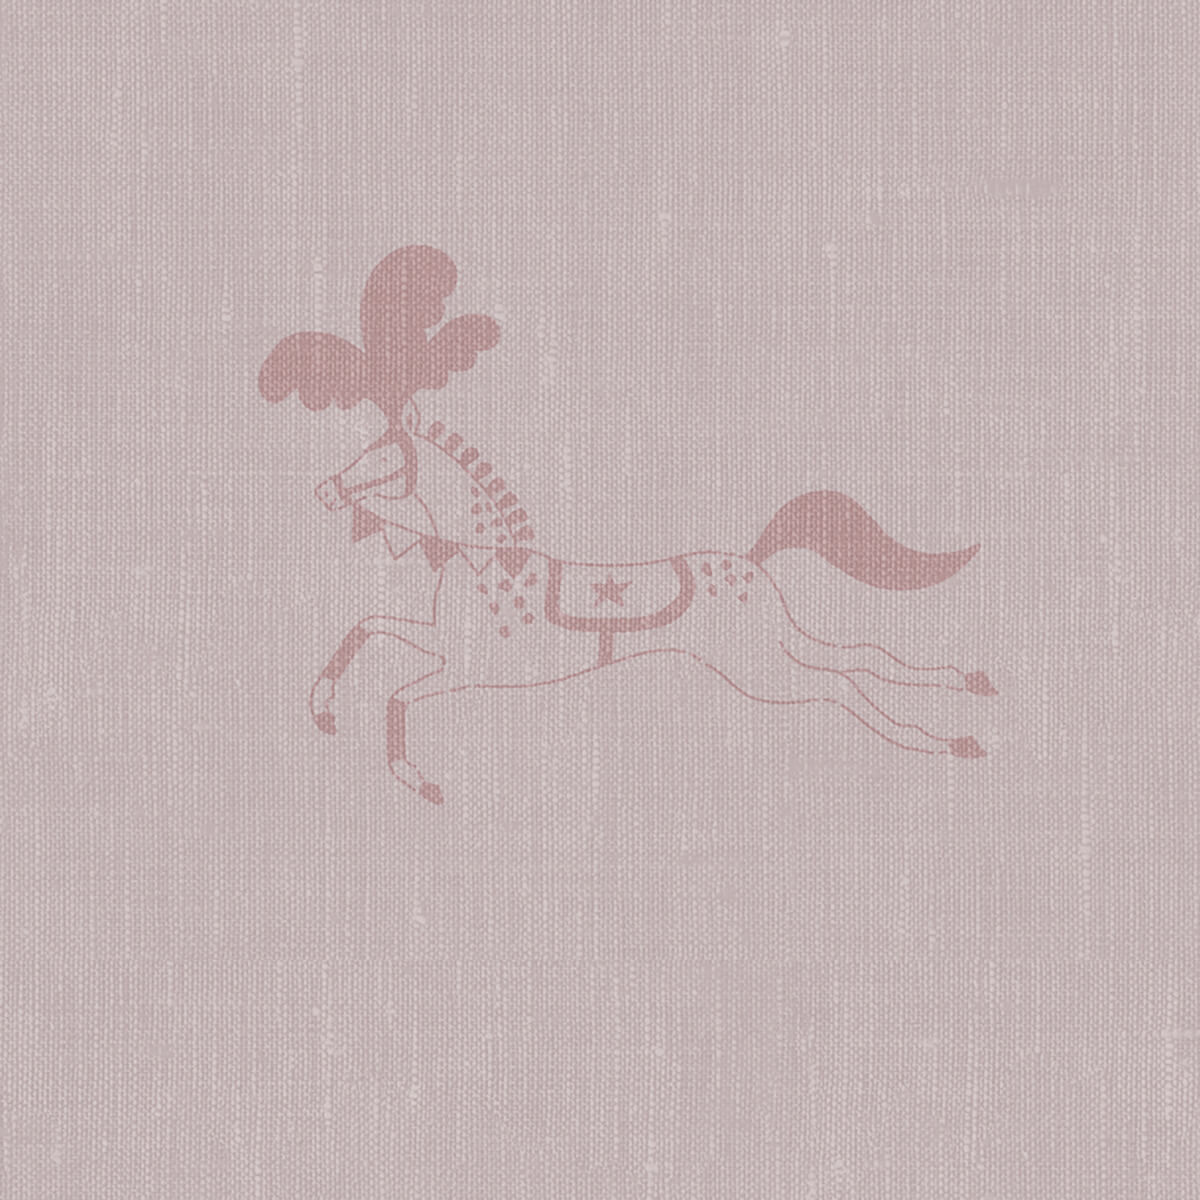 Fairground Ponies Blush Made to Measure Curtains